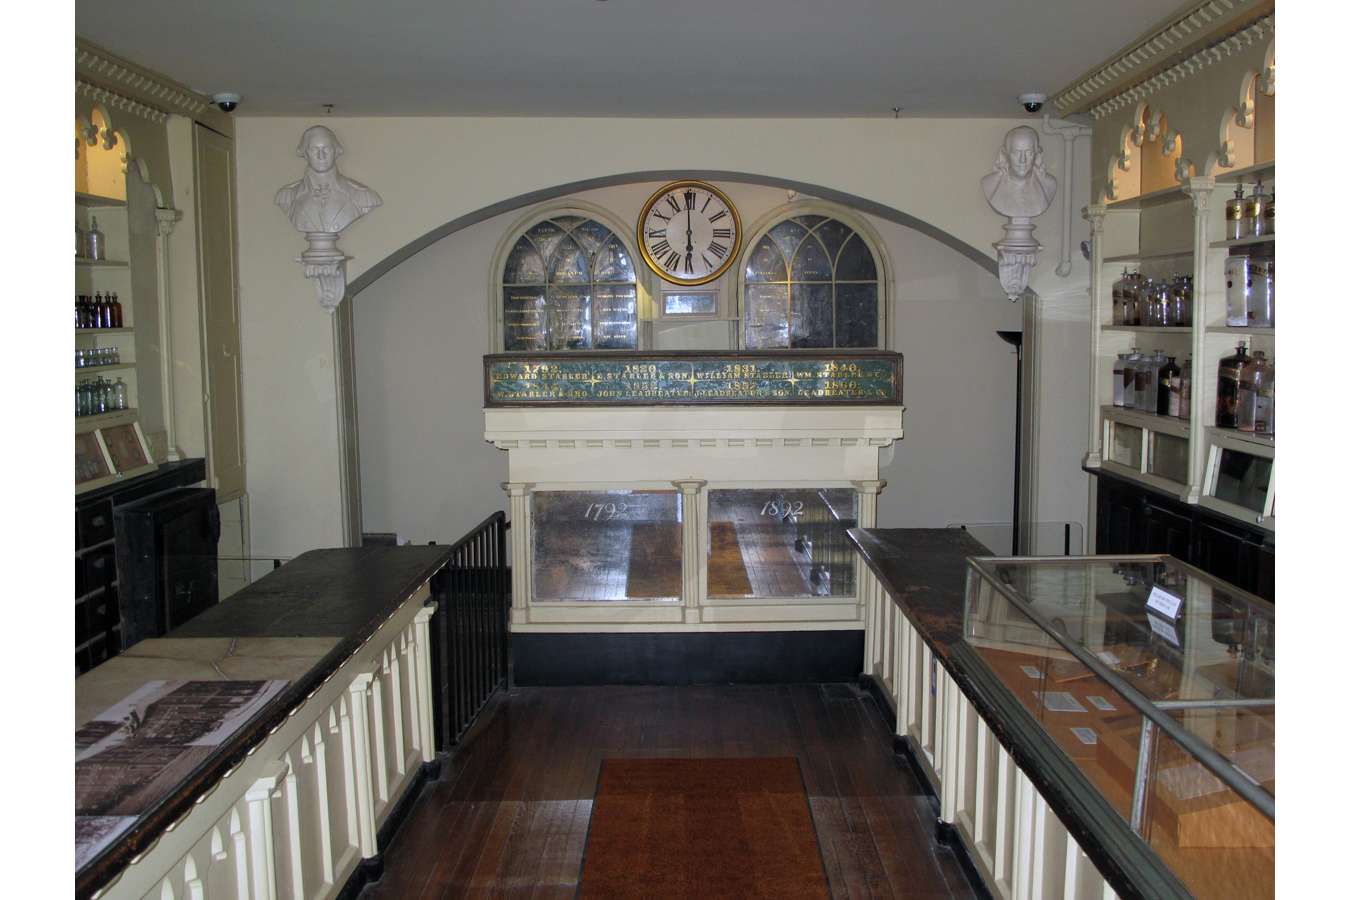 Apoth 7852 : Restored busts of George Washington and Ben Franklin and clock returned to arched wall